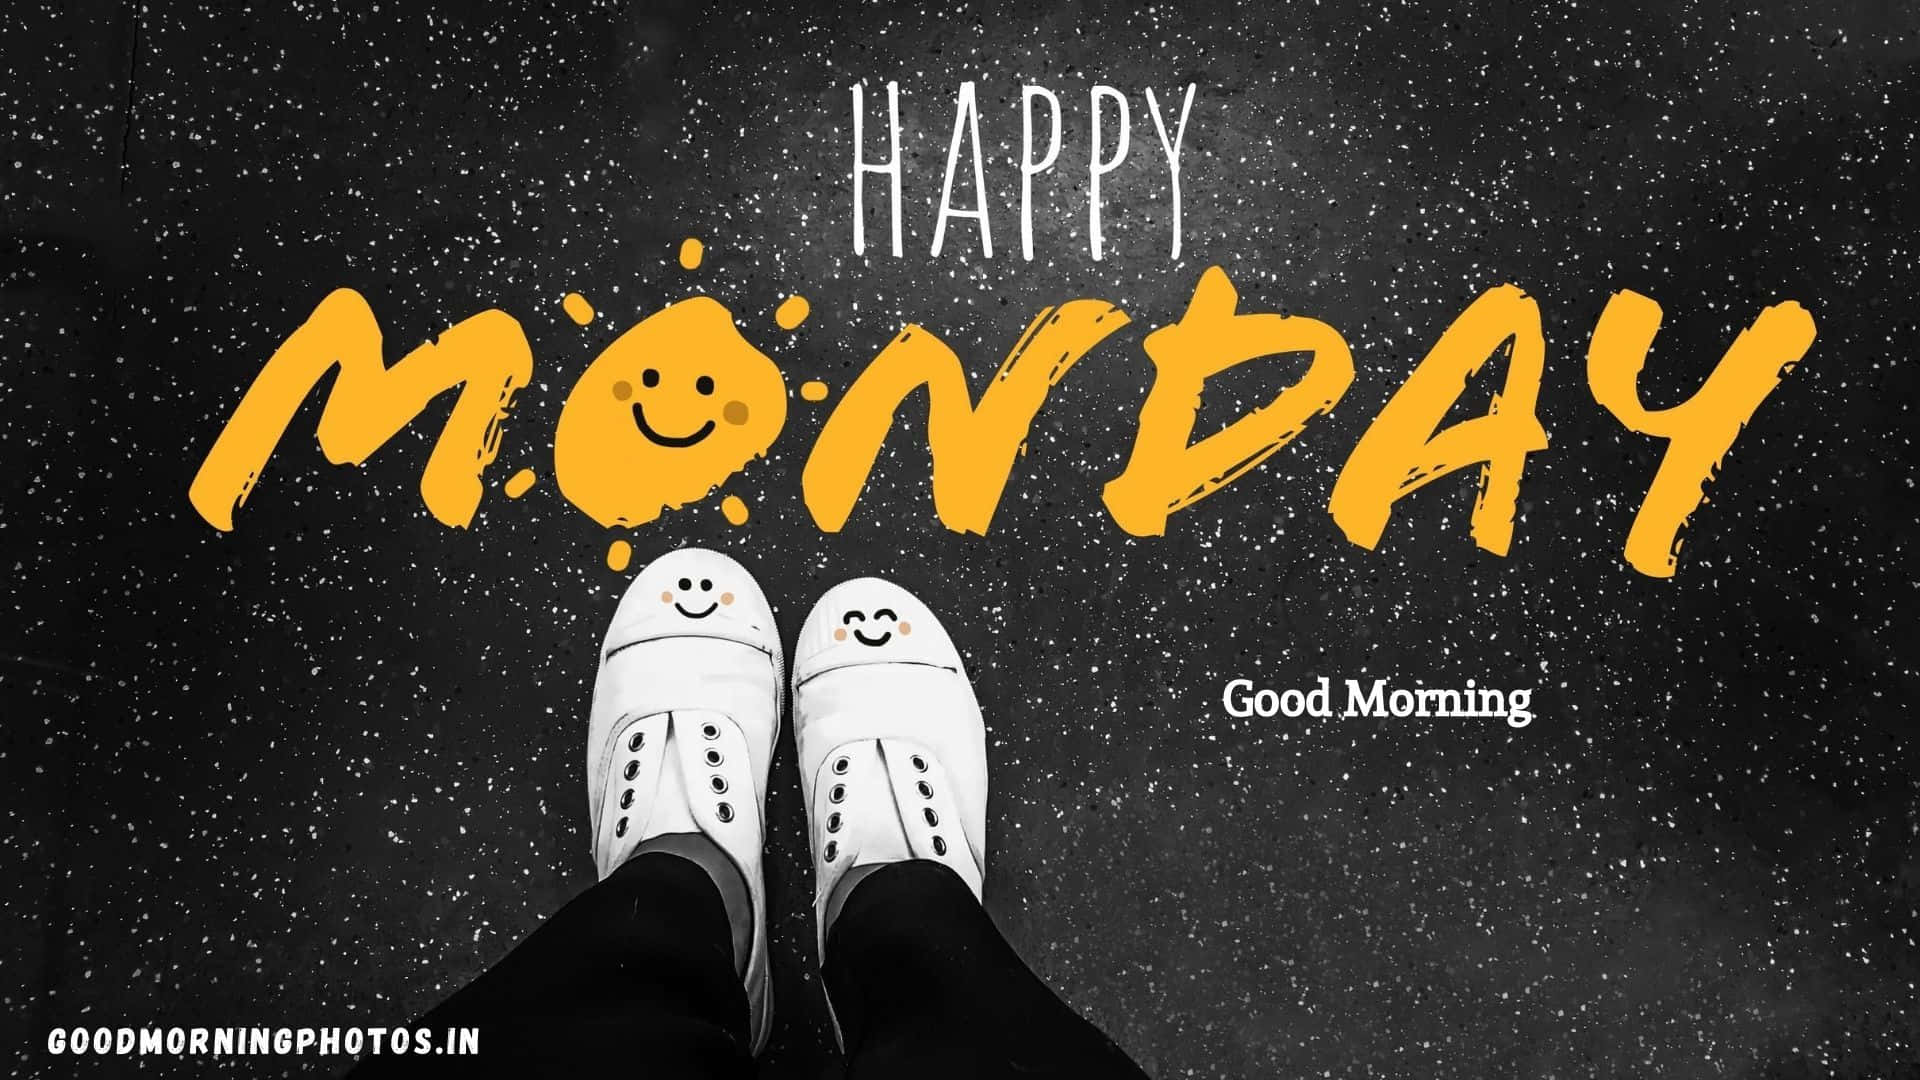 Make Your Monday – Start Your Week With a Positive Attitude